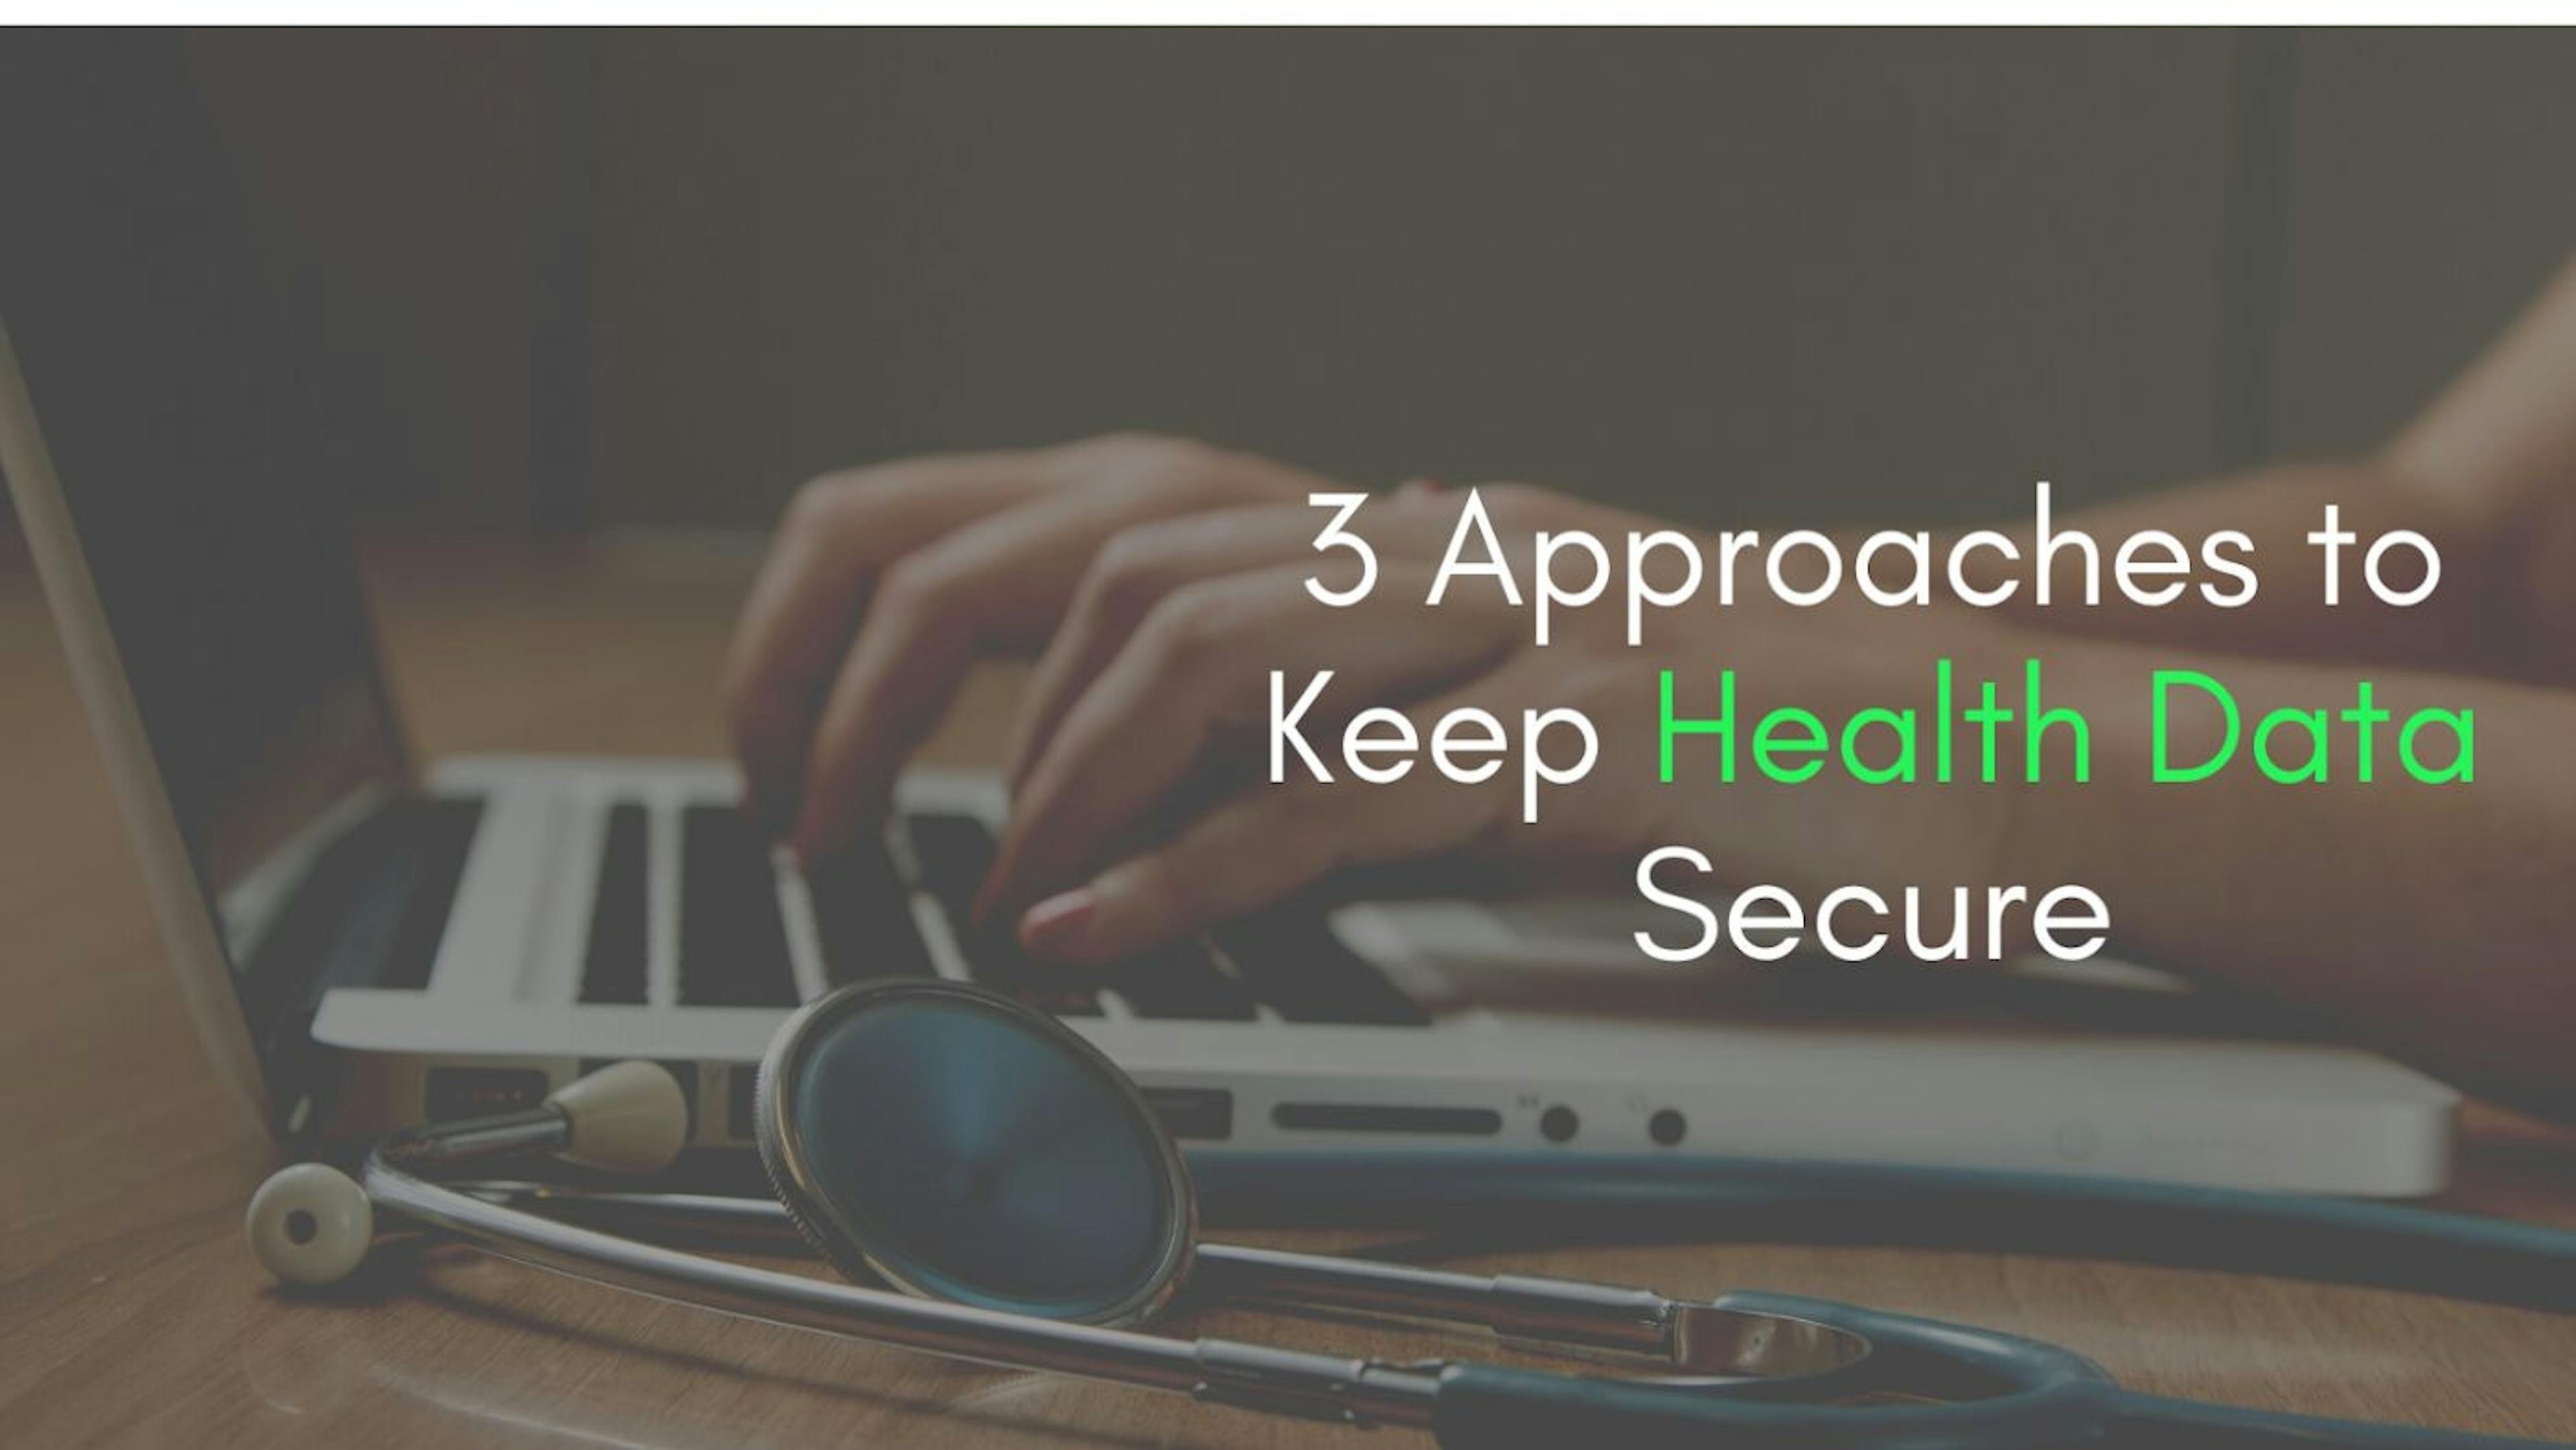 featured image - Technical Approaches to Keep Health Data Secure